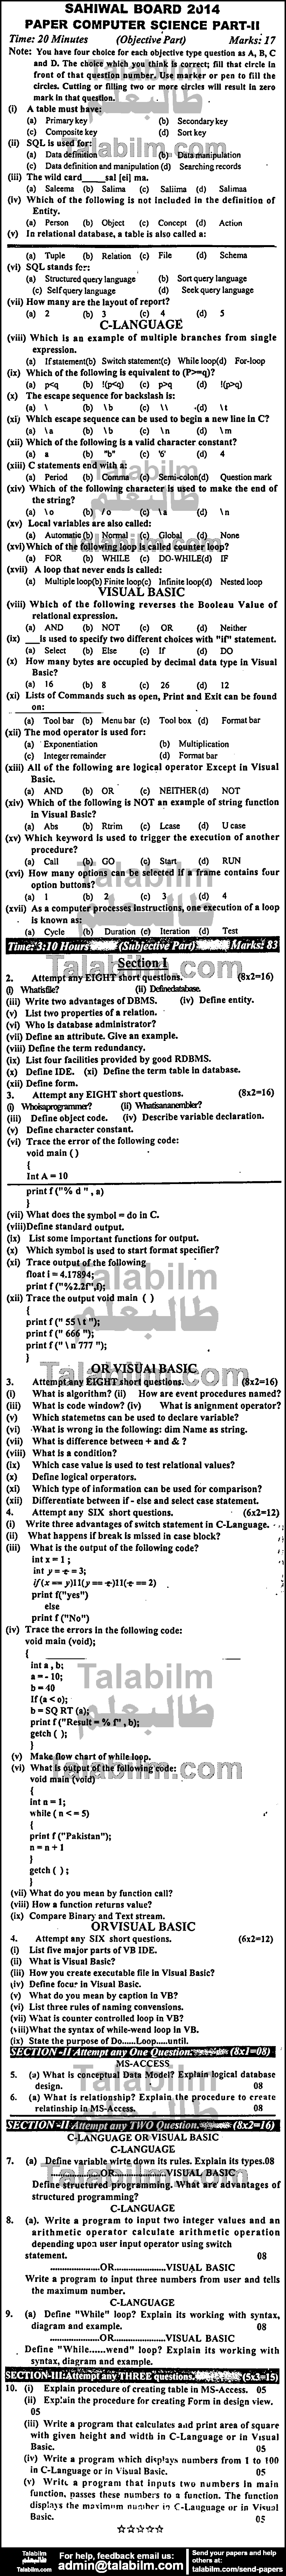 Computer Science 0 past paper for Group-I 2014